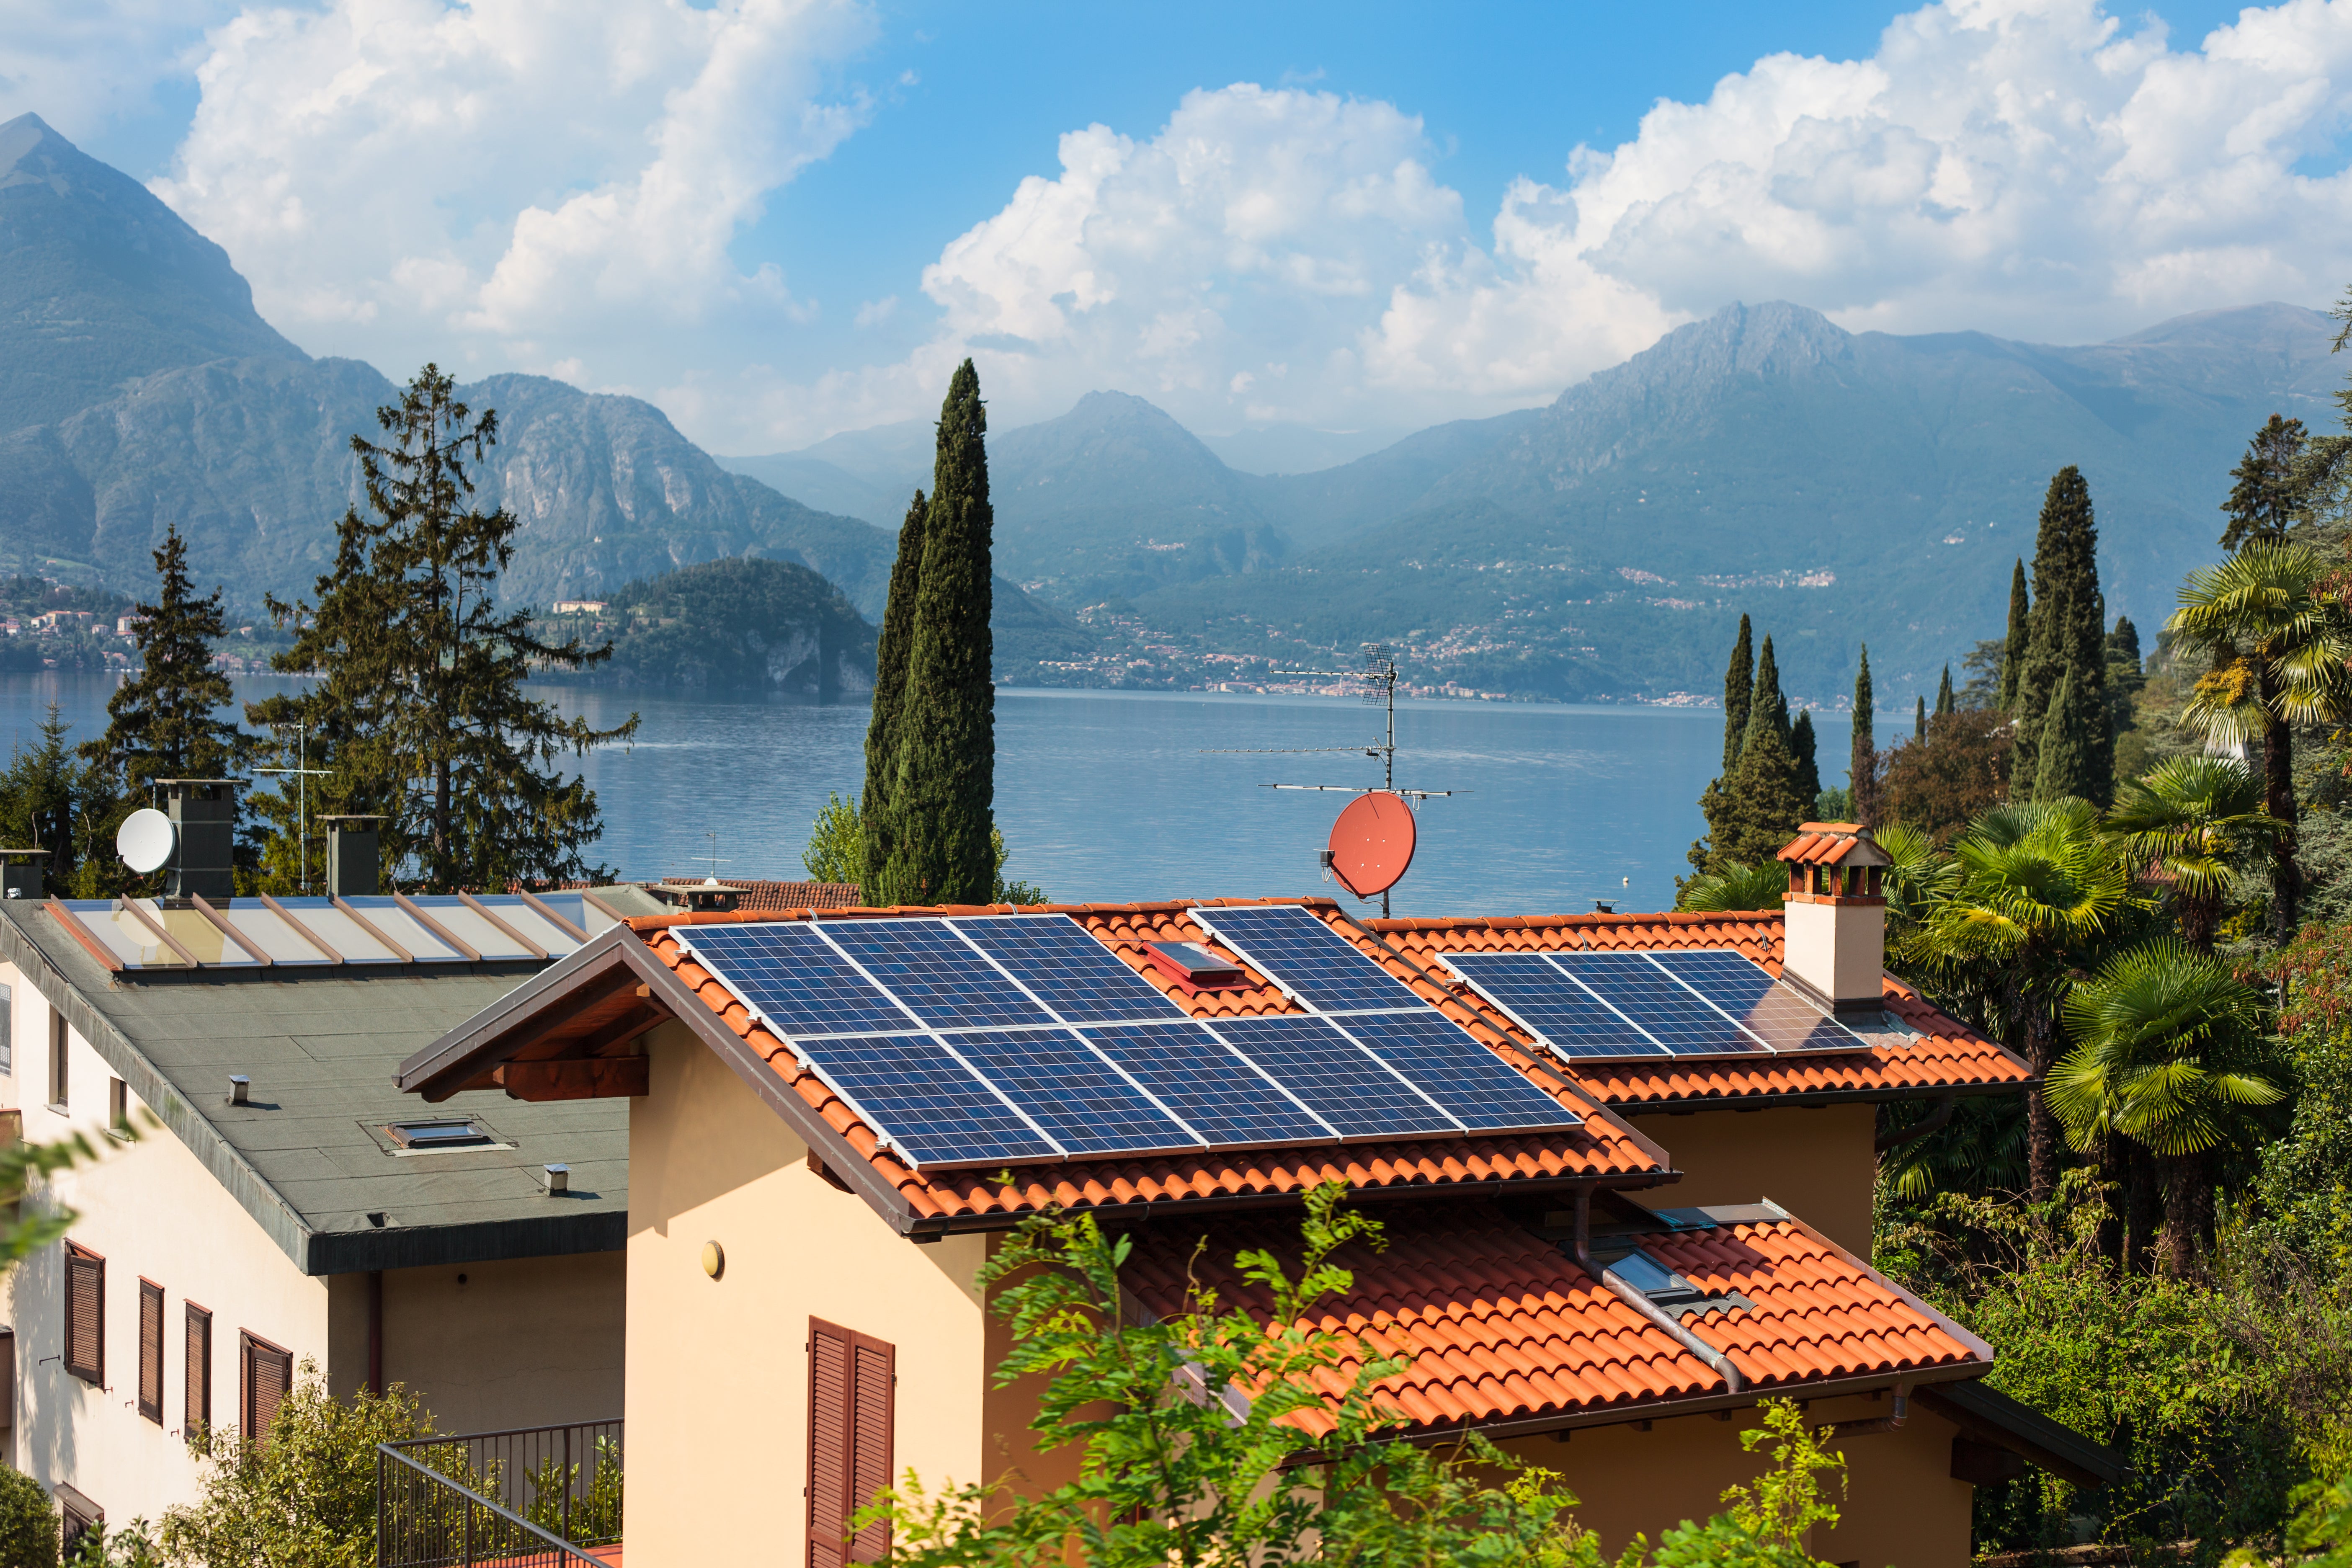 EU proposes making solar panels mandatory on all new buildings | The Independent